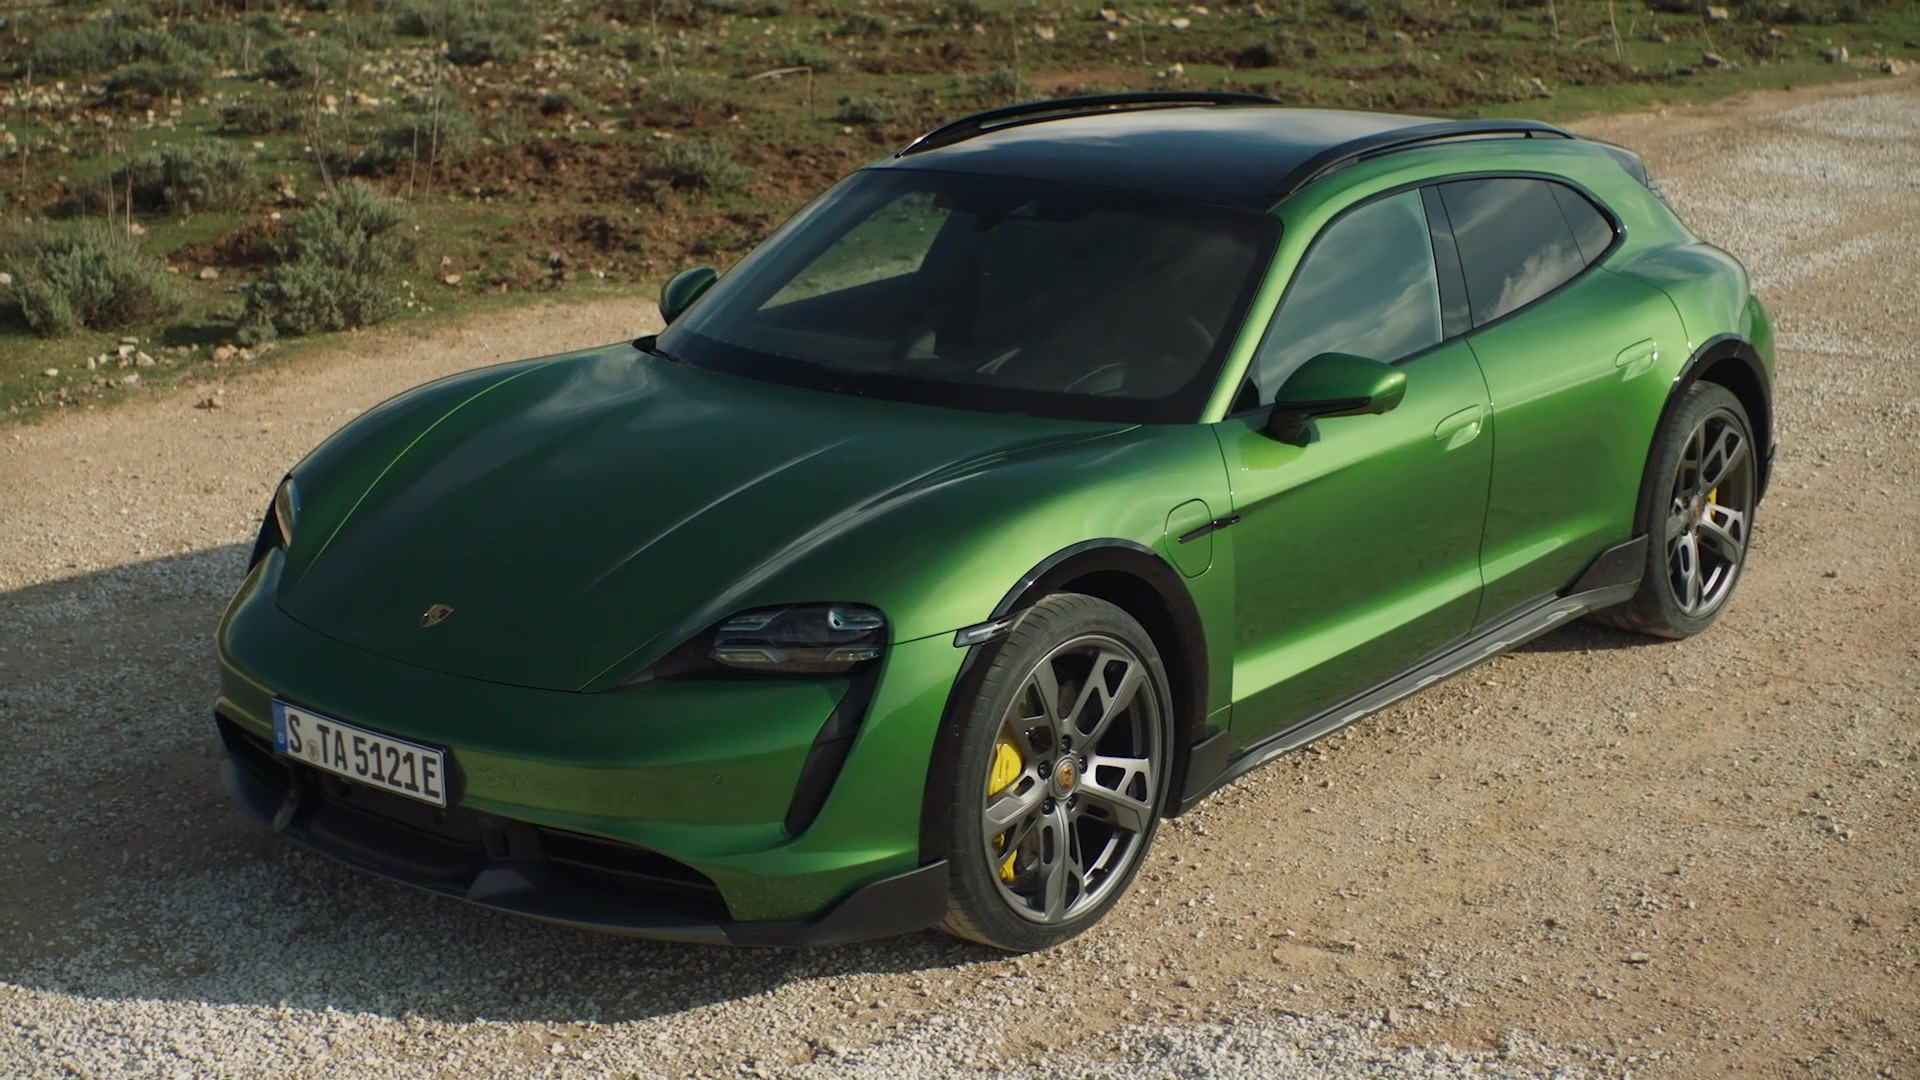 The new Porsche Taycan Turbo S Cross Turismo Design in Green - video  Dailymotion